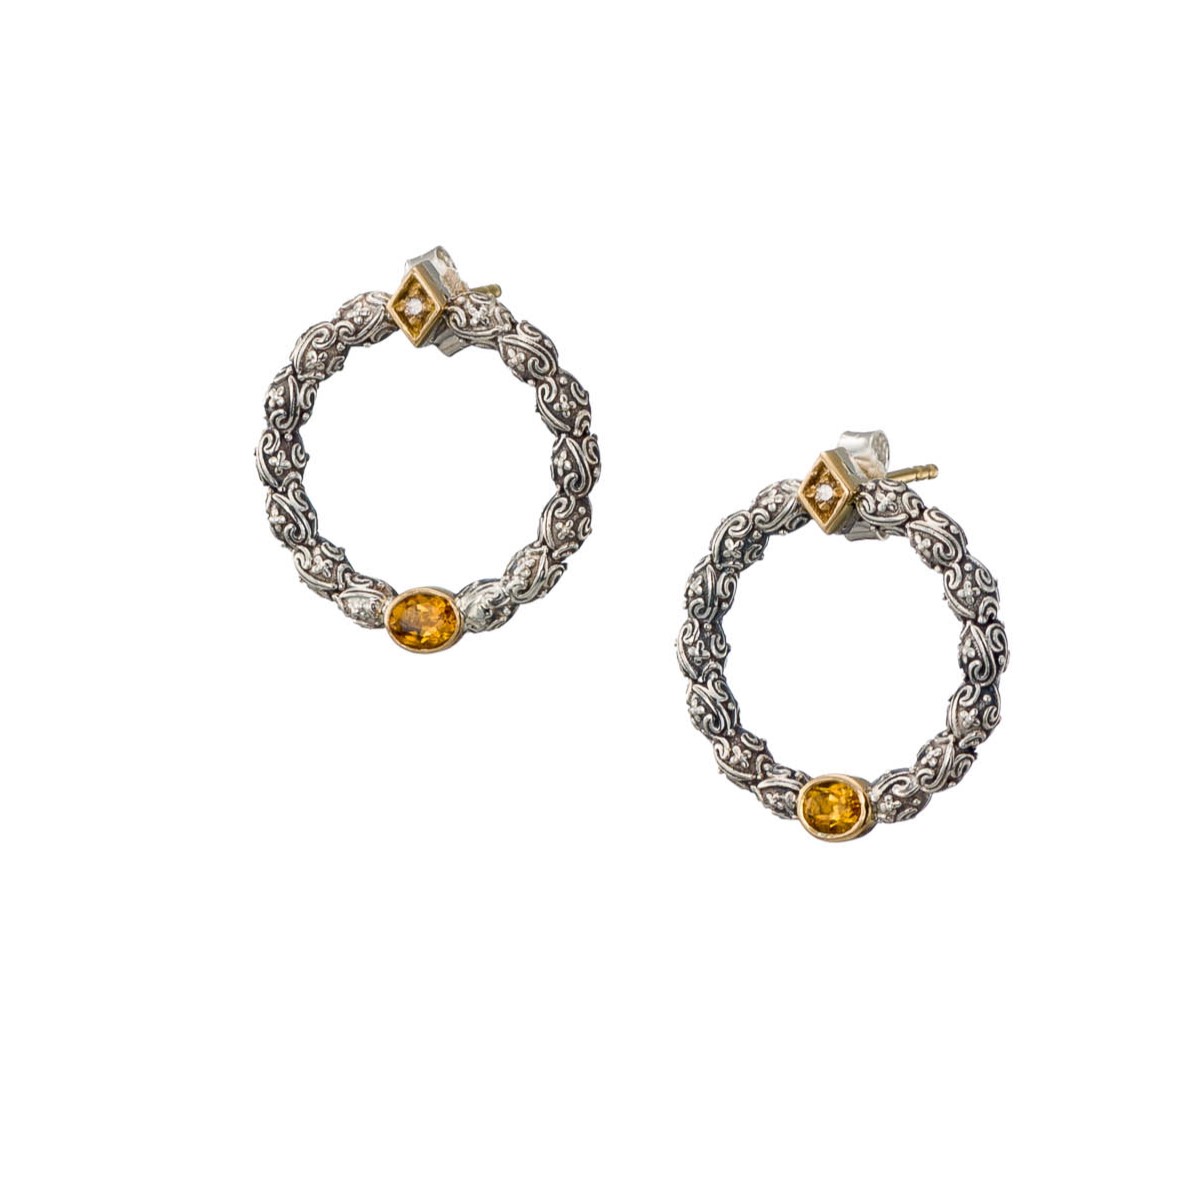 Eve stud circle earrings in 18K Gold Sterling silver and Gemstones